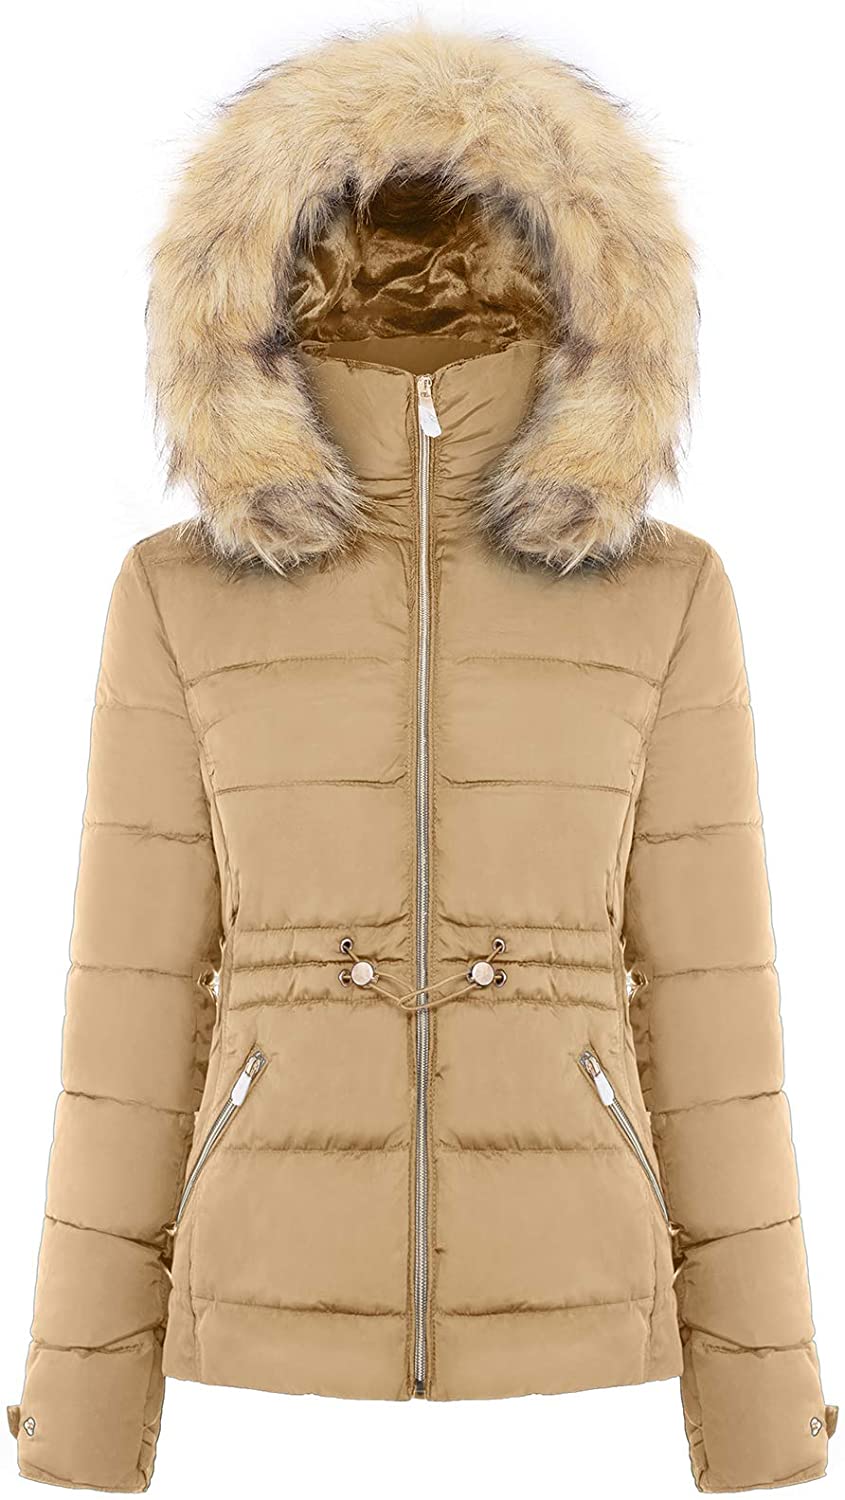 BodiLove with Coat eBay Women\'s Puffer | Removable Short Fur Winter Jacket Faux Quilted